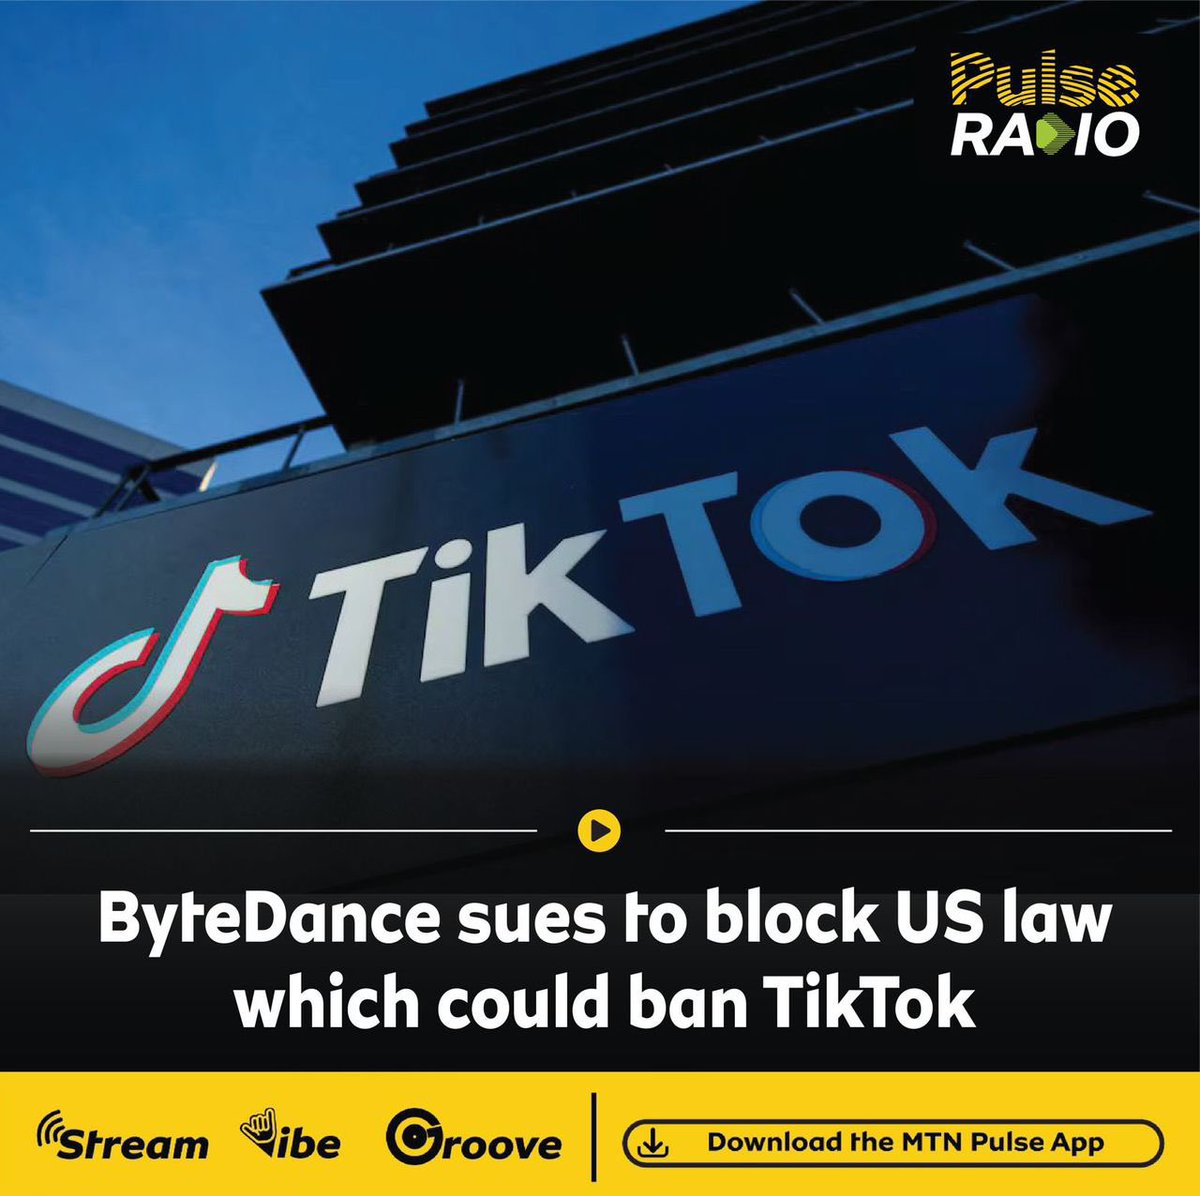 ByteDance, parent company of TikTok are suing U.S. Federal court to block a law signed by President Joe Biden that would force the divestiture of the short video app used by 170 million Americans or ban it.  #PulseRadioUG